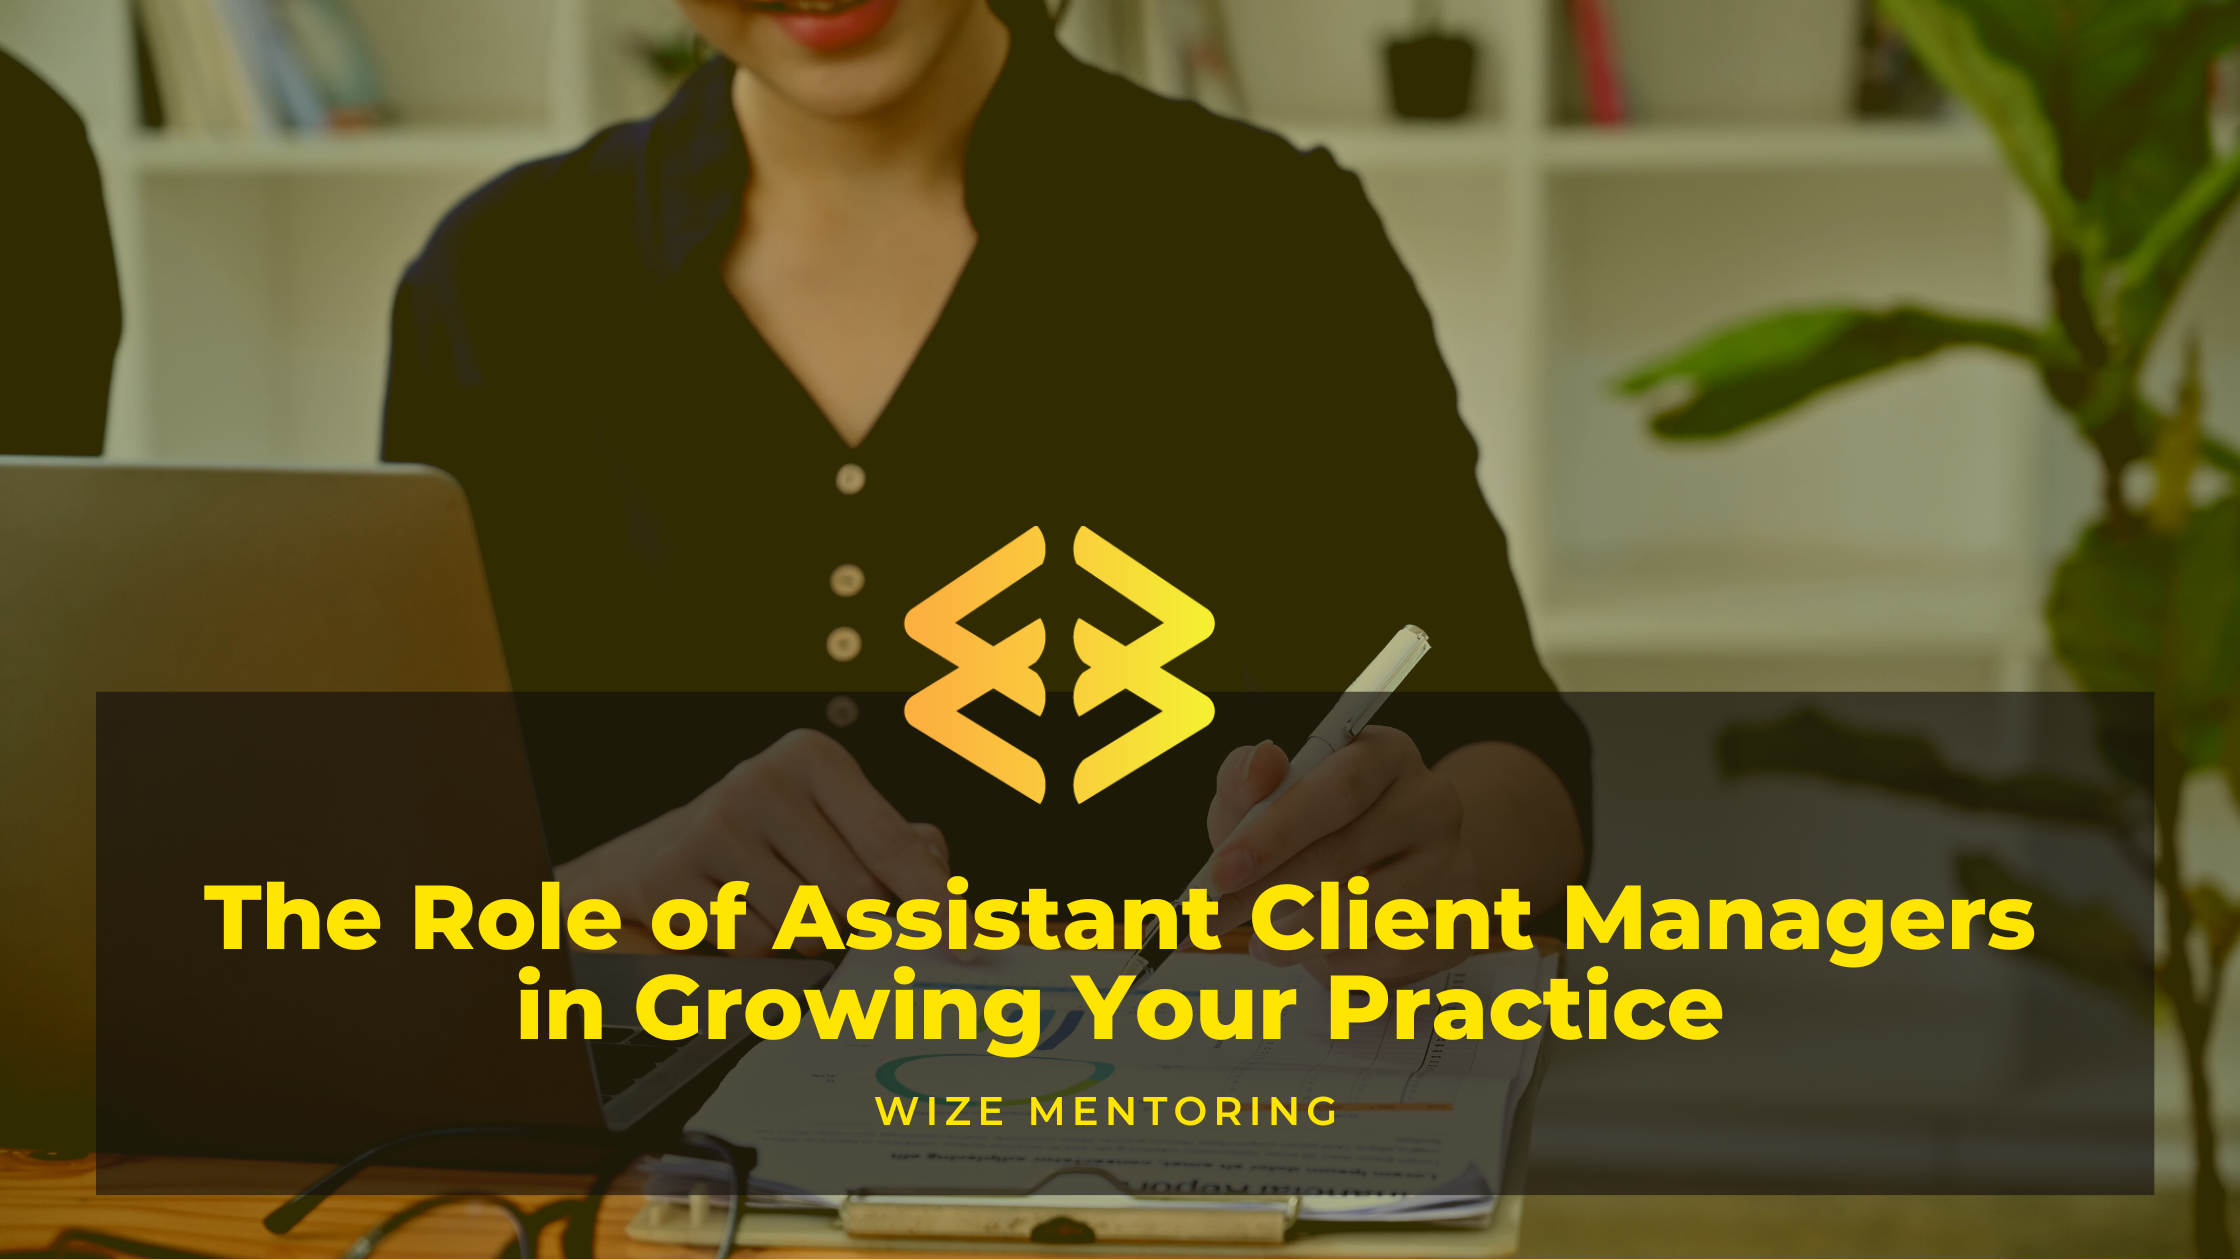 The Role of Assistant Client Managers in Growing Your Practice